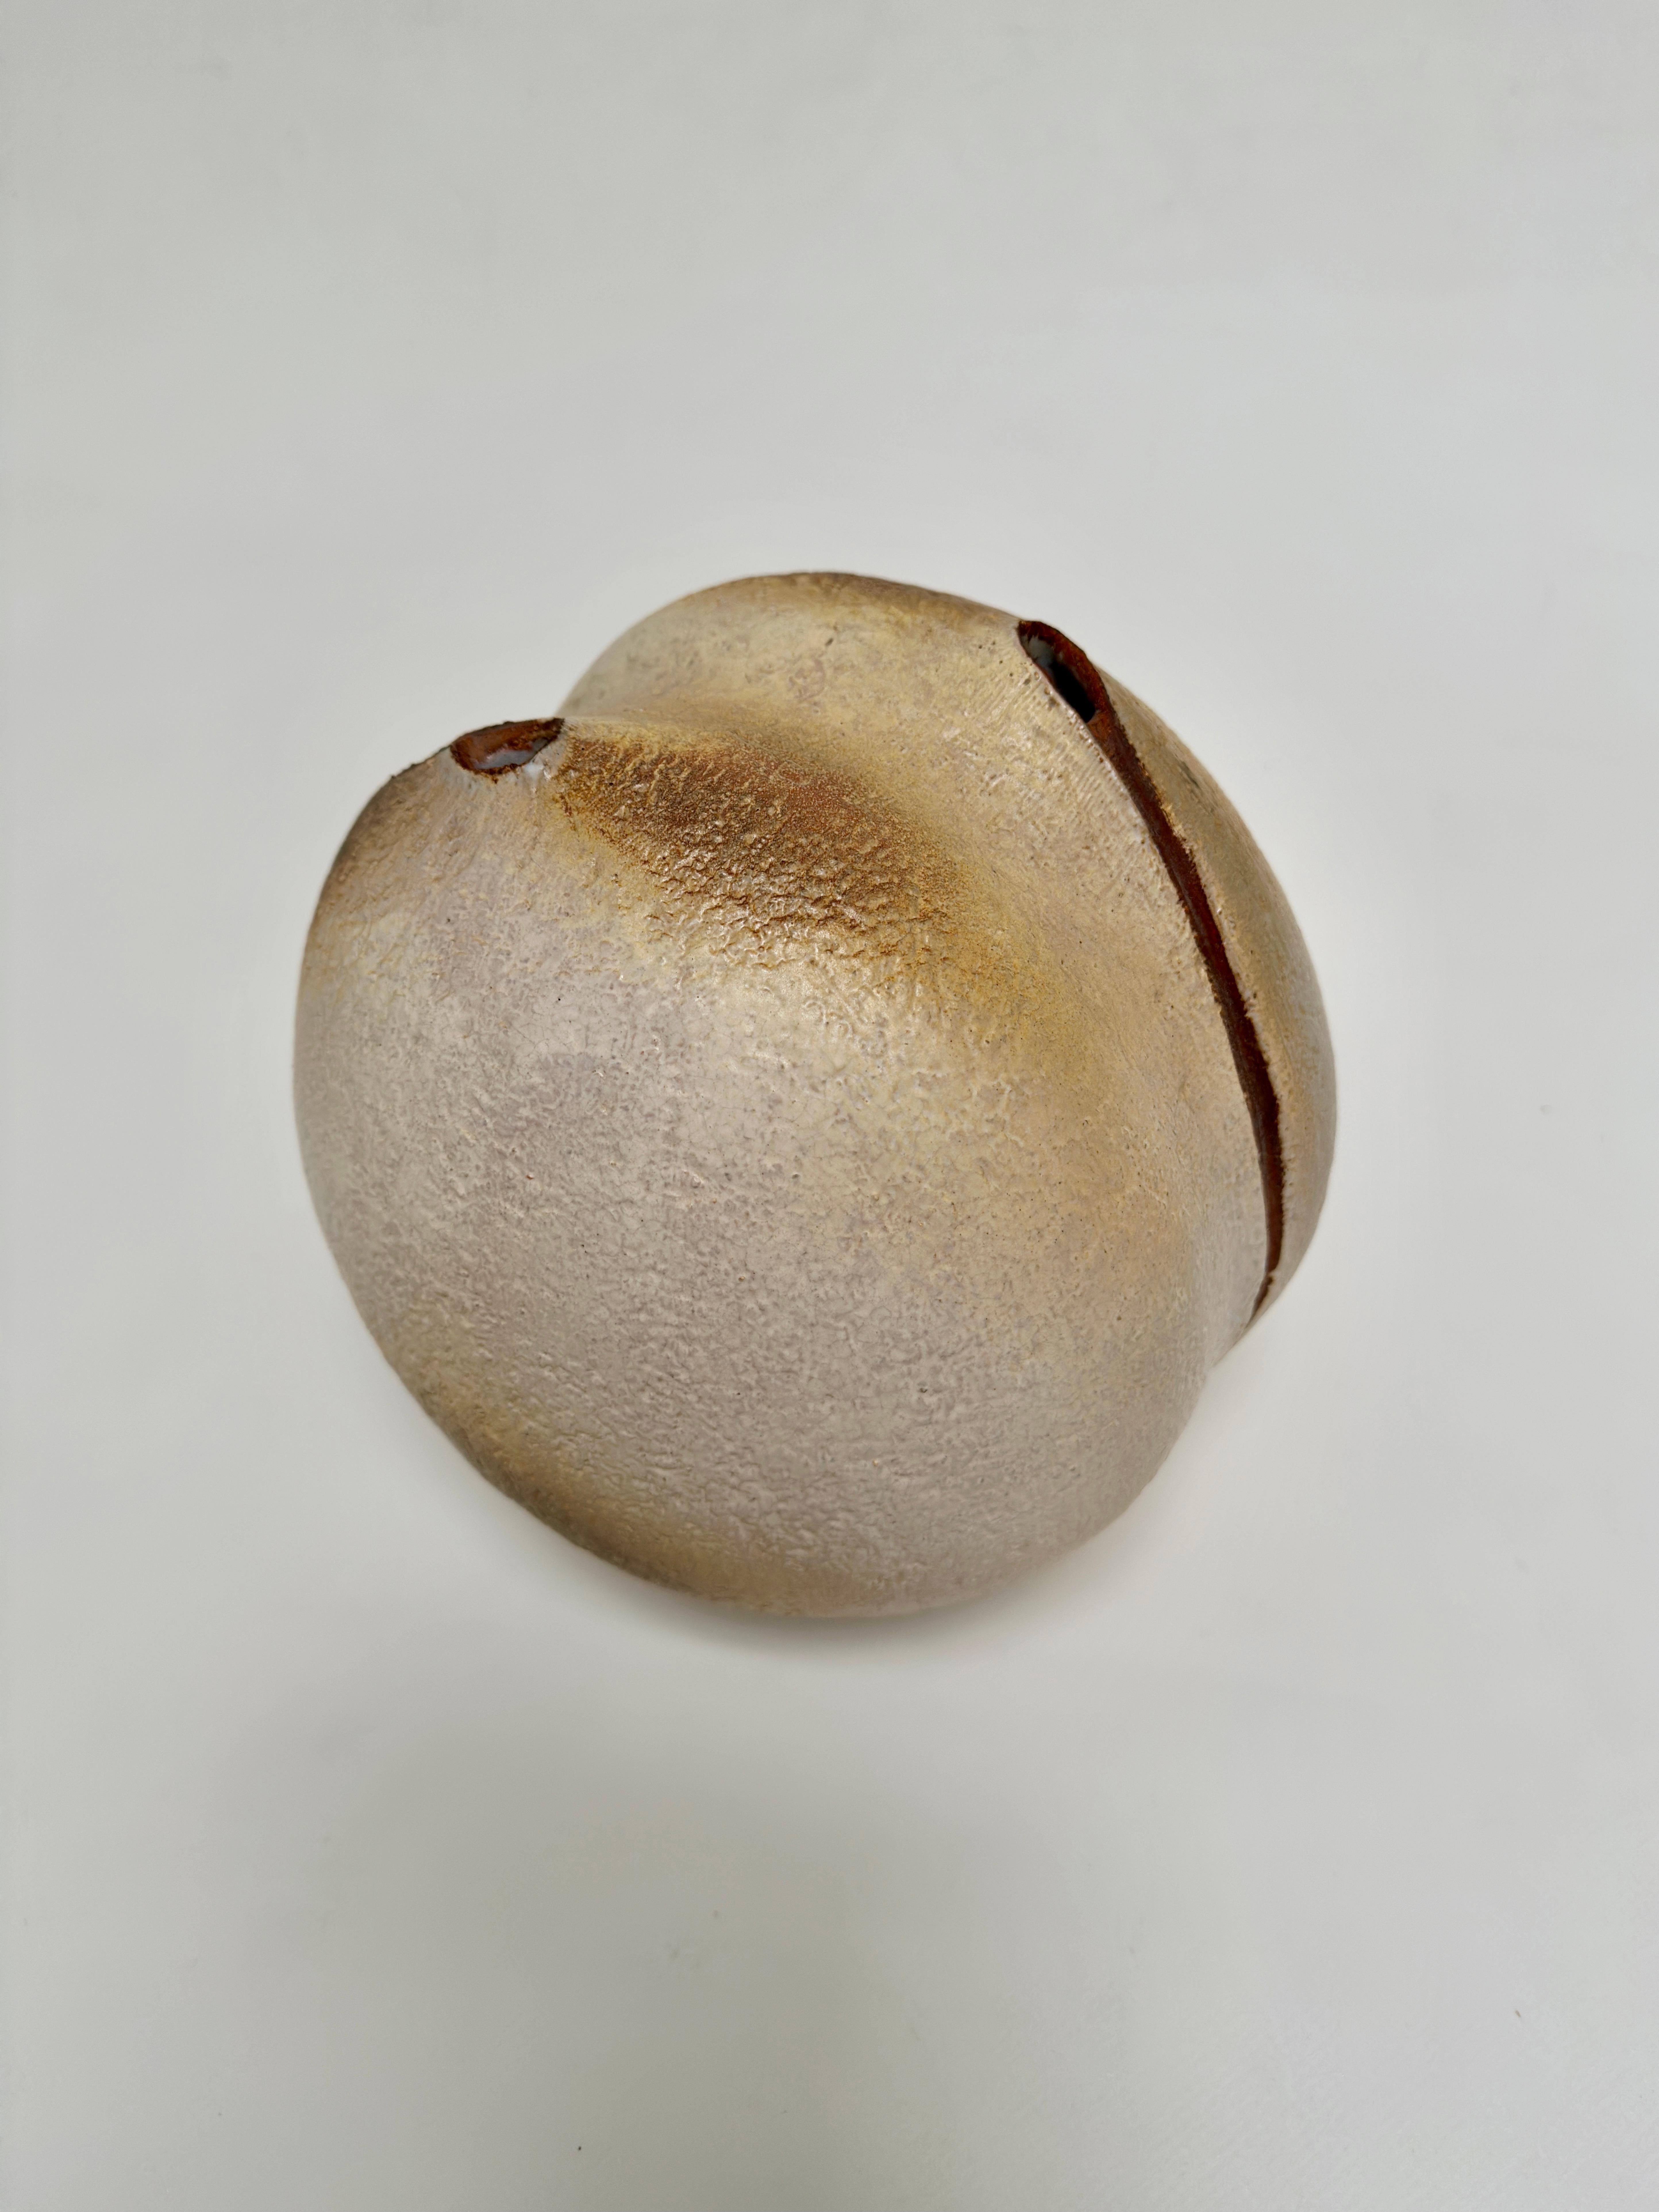 Astonishing Vase sculpture in textured sandstone evoking the generous shapes of a seed.
This sensual and dense piece is typical of the modernist creations of the Madoura studio in the 1970s.

Atelier Madoura is inseparable from the ceramic work of